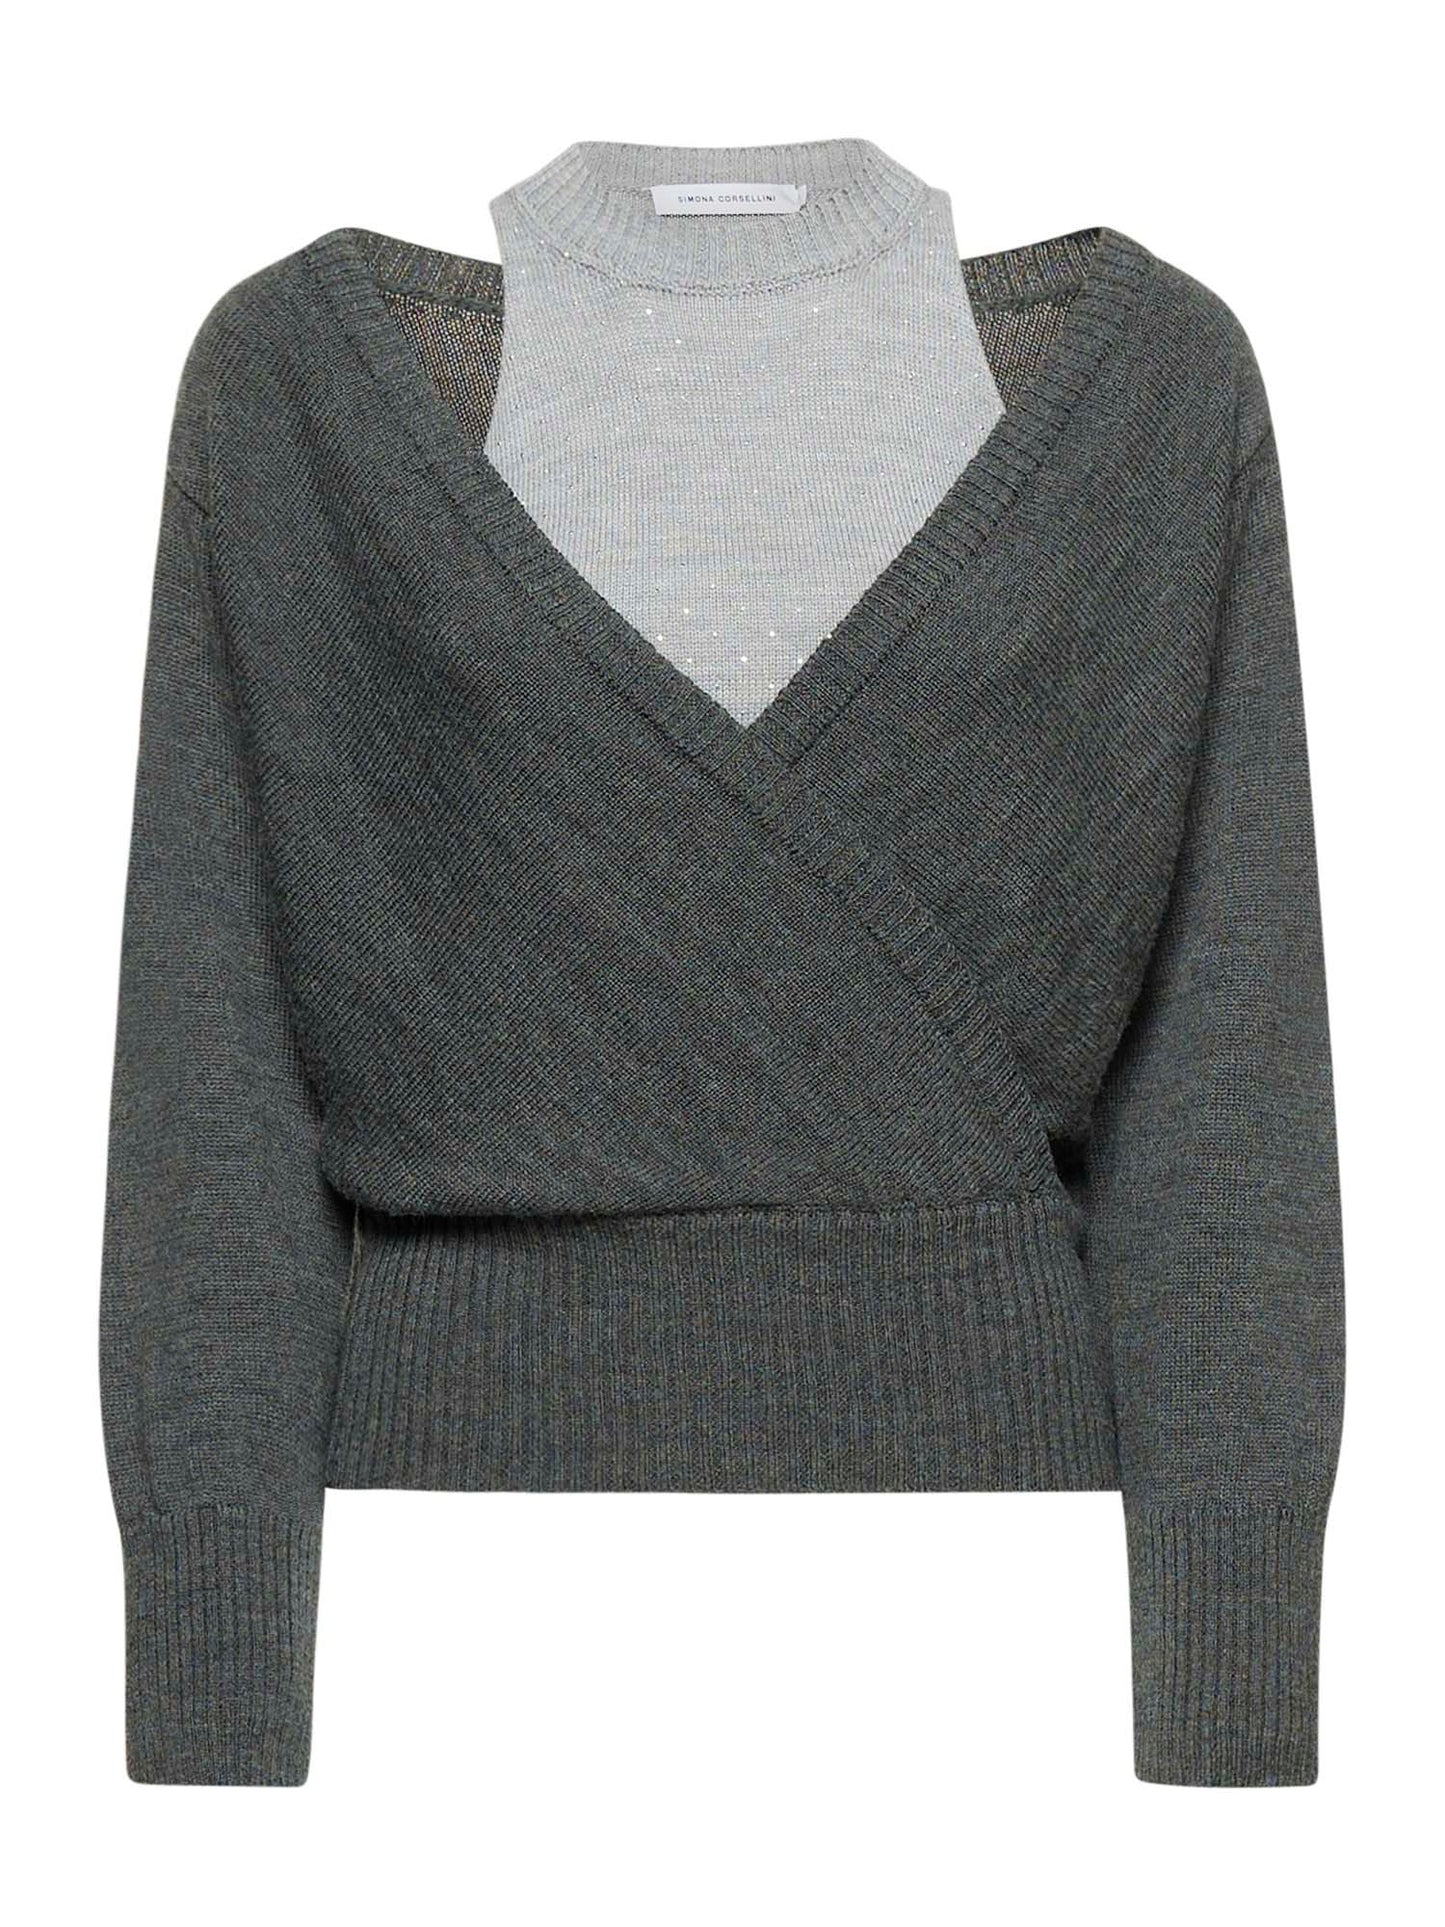 Wool-blend criss-cross sweater with micro studs